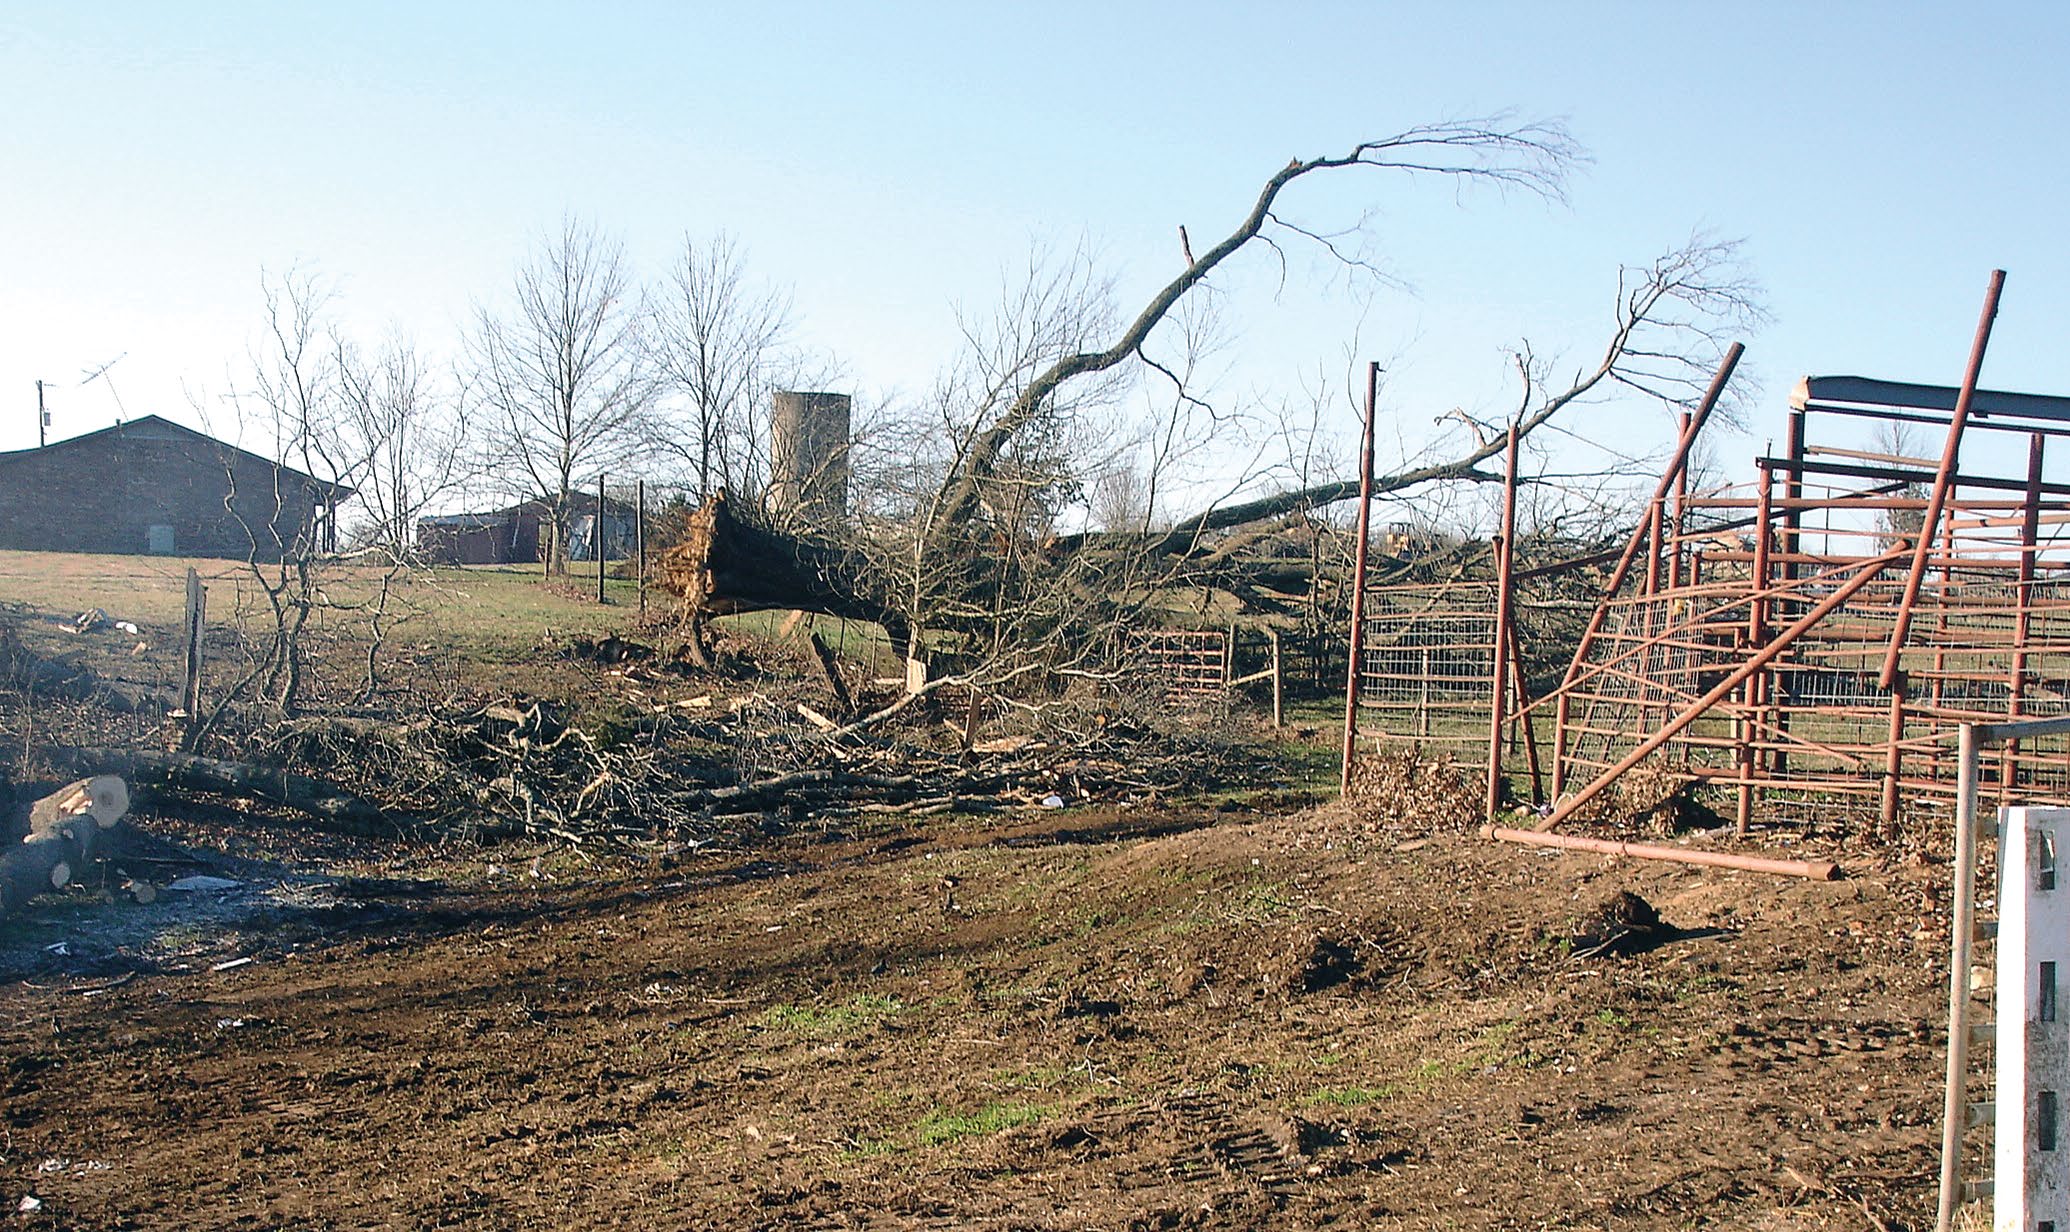 Farmland with debris and property damage caused by a hurricane.